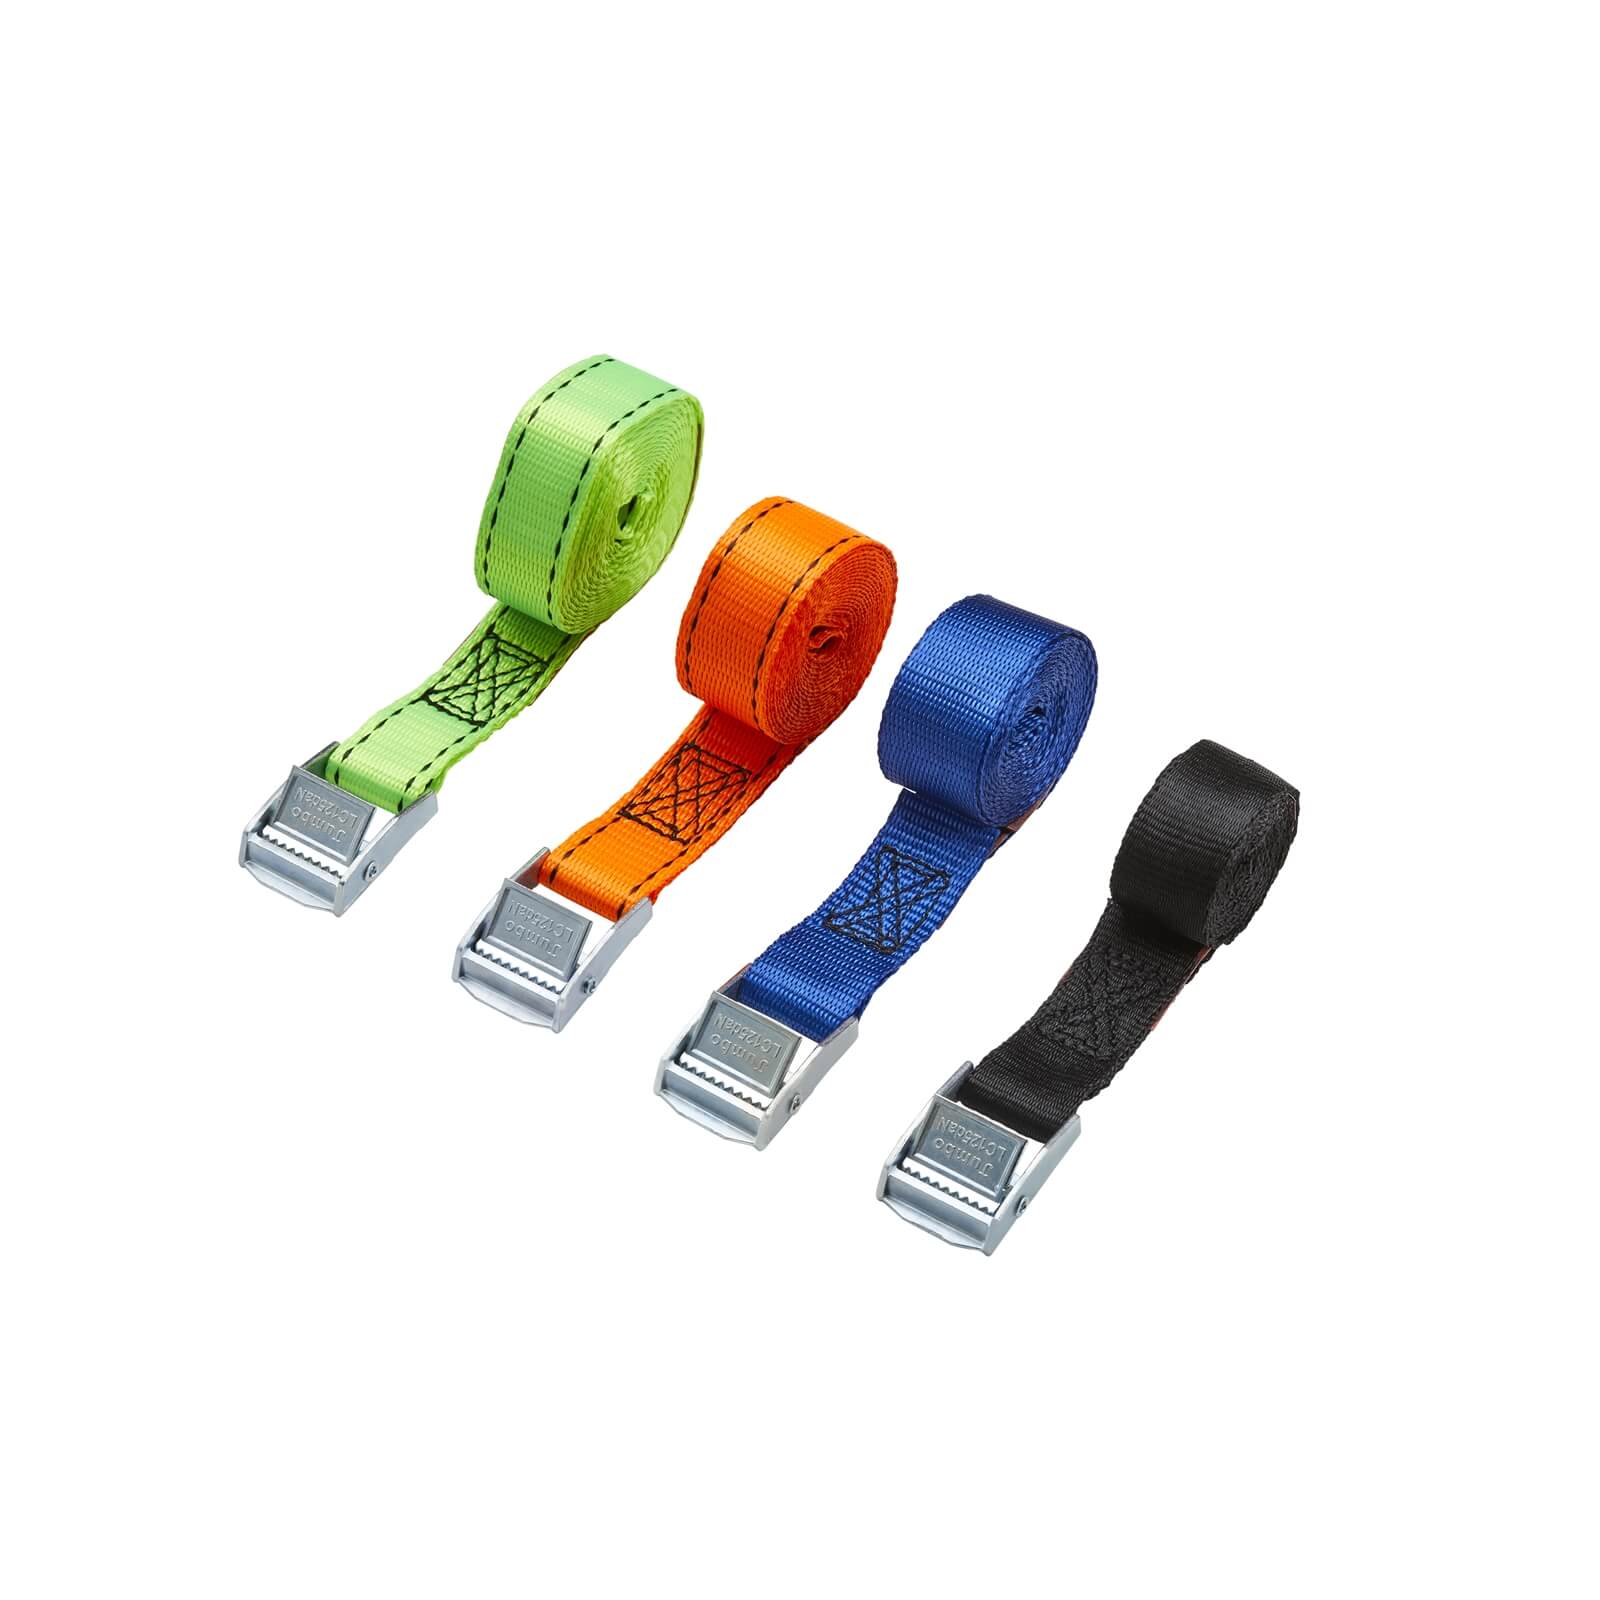 Assorted Cambuckle Set - 4 Pack